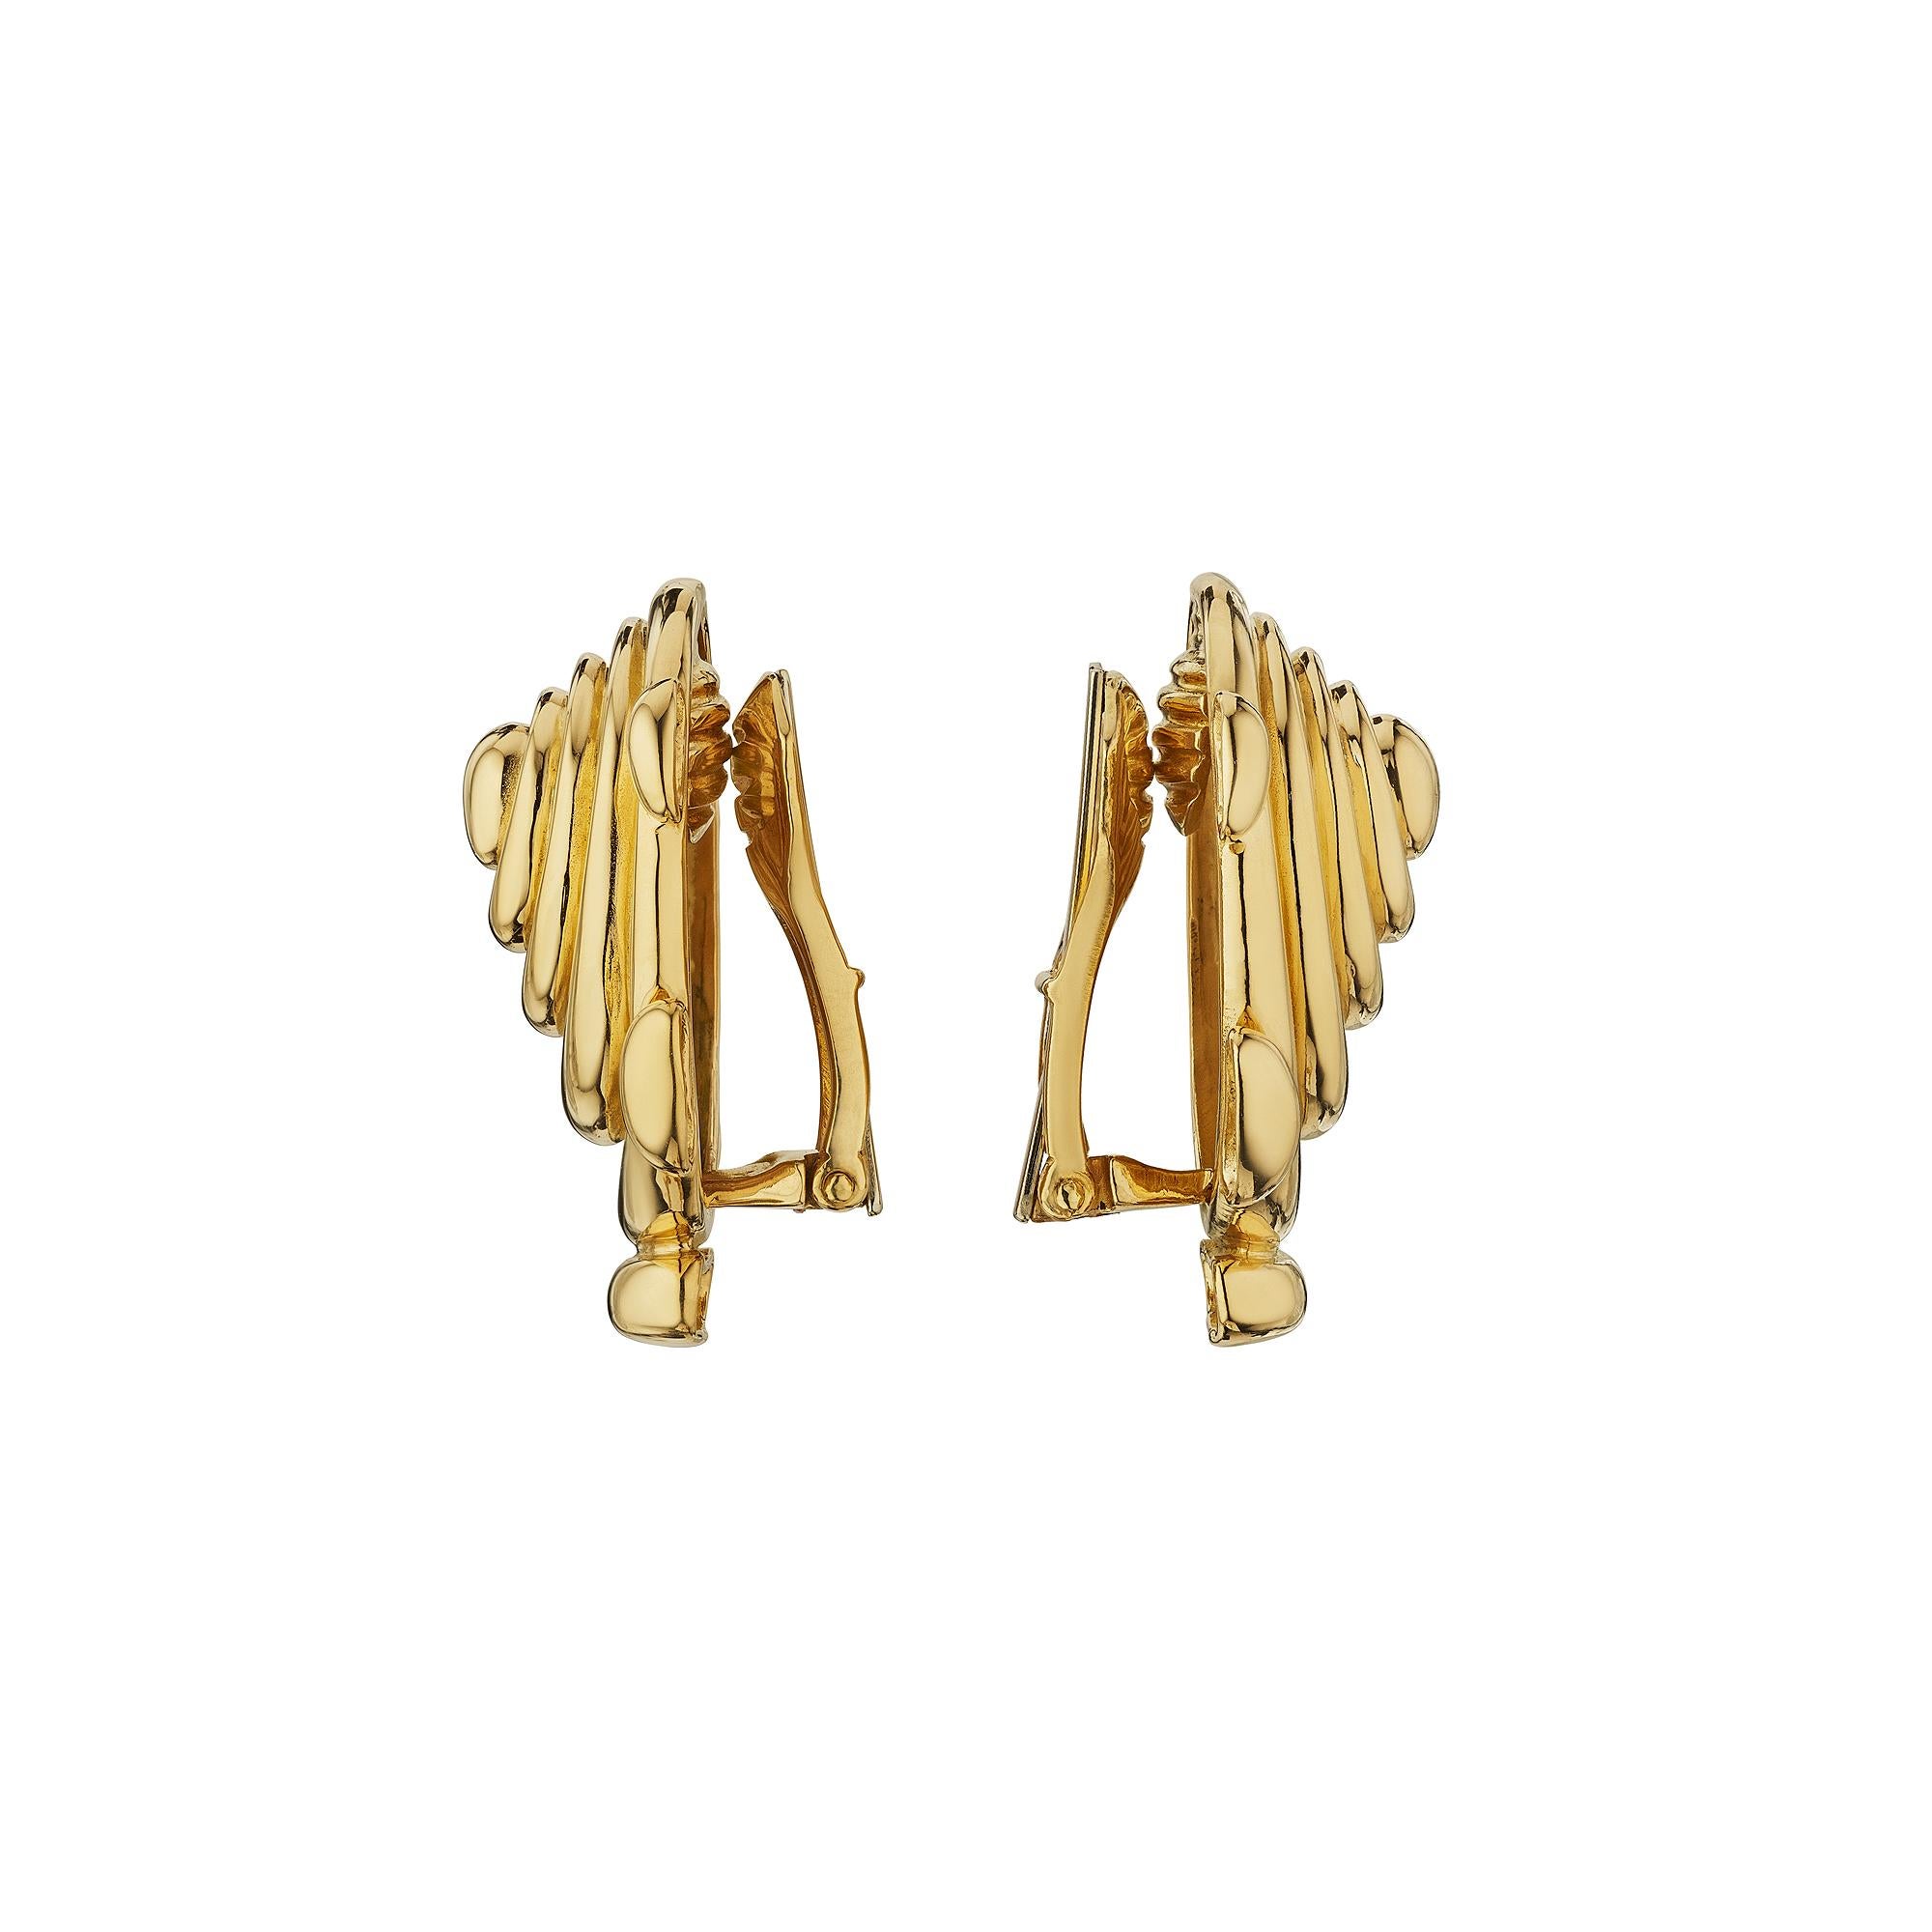 Take off with the speed of a 'Sputnik' with these Aldo Cipullo for Cartier modernist 18 karat yellow gold clip earrings.  Circa 1970-75.  Signed A. Cipullo.  1